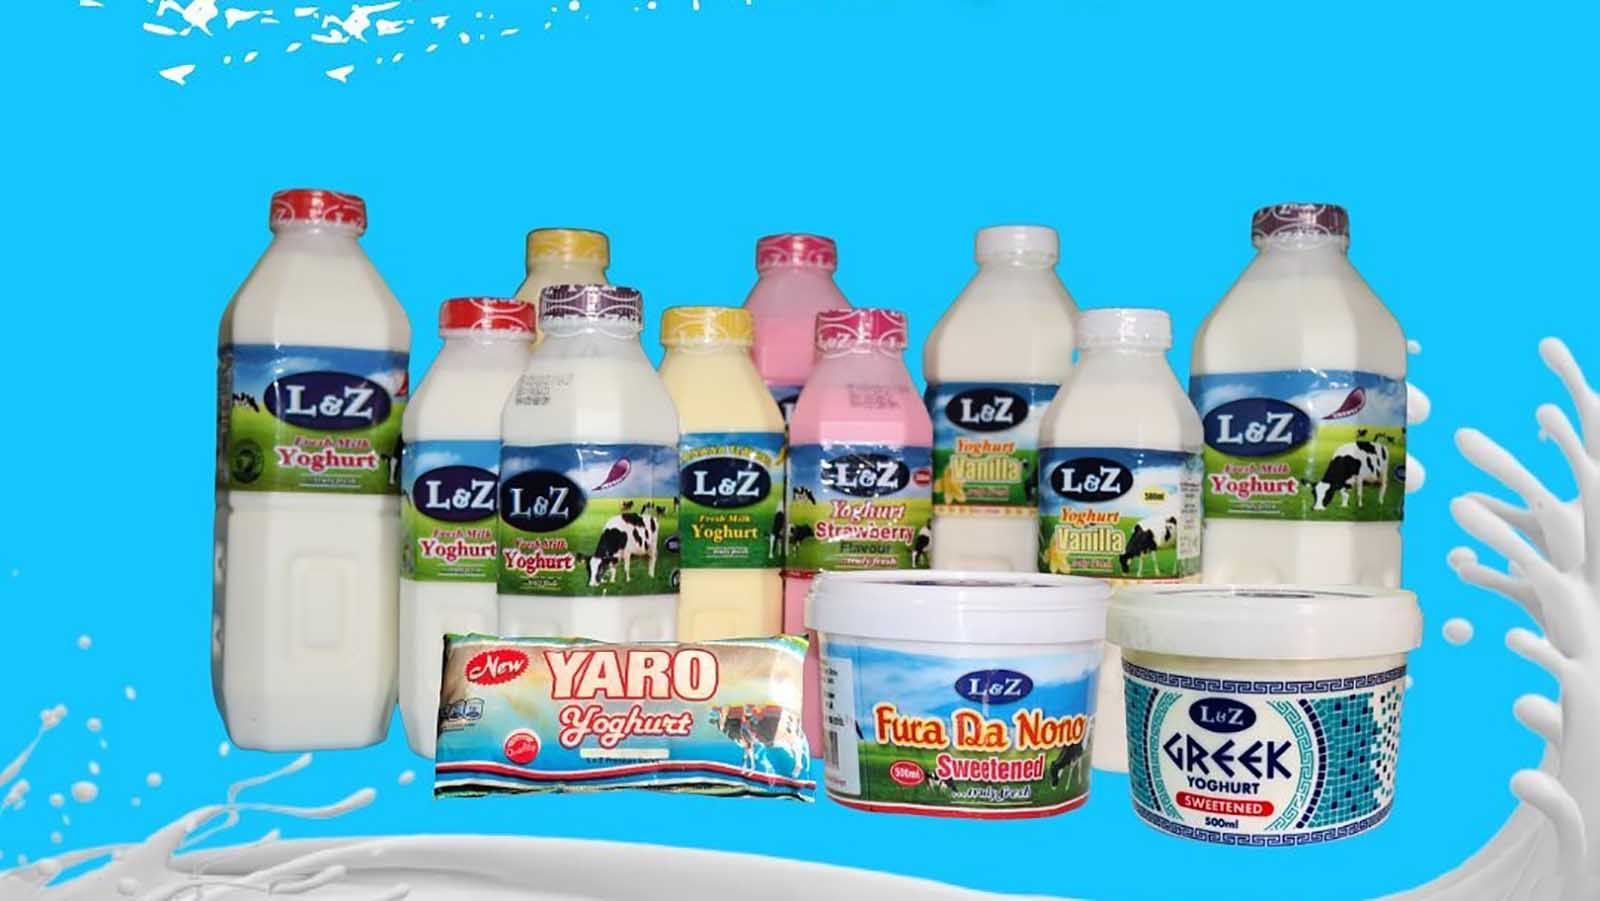 <strong>Nigerian dairy company L&Z marks end of 7-year growth partnership with Sahel Capital</strong>